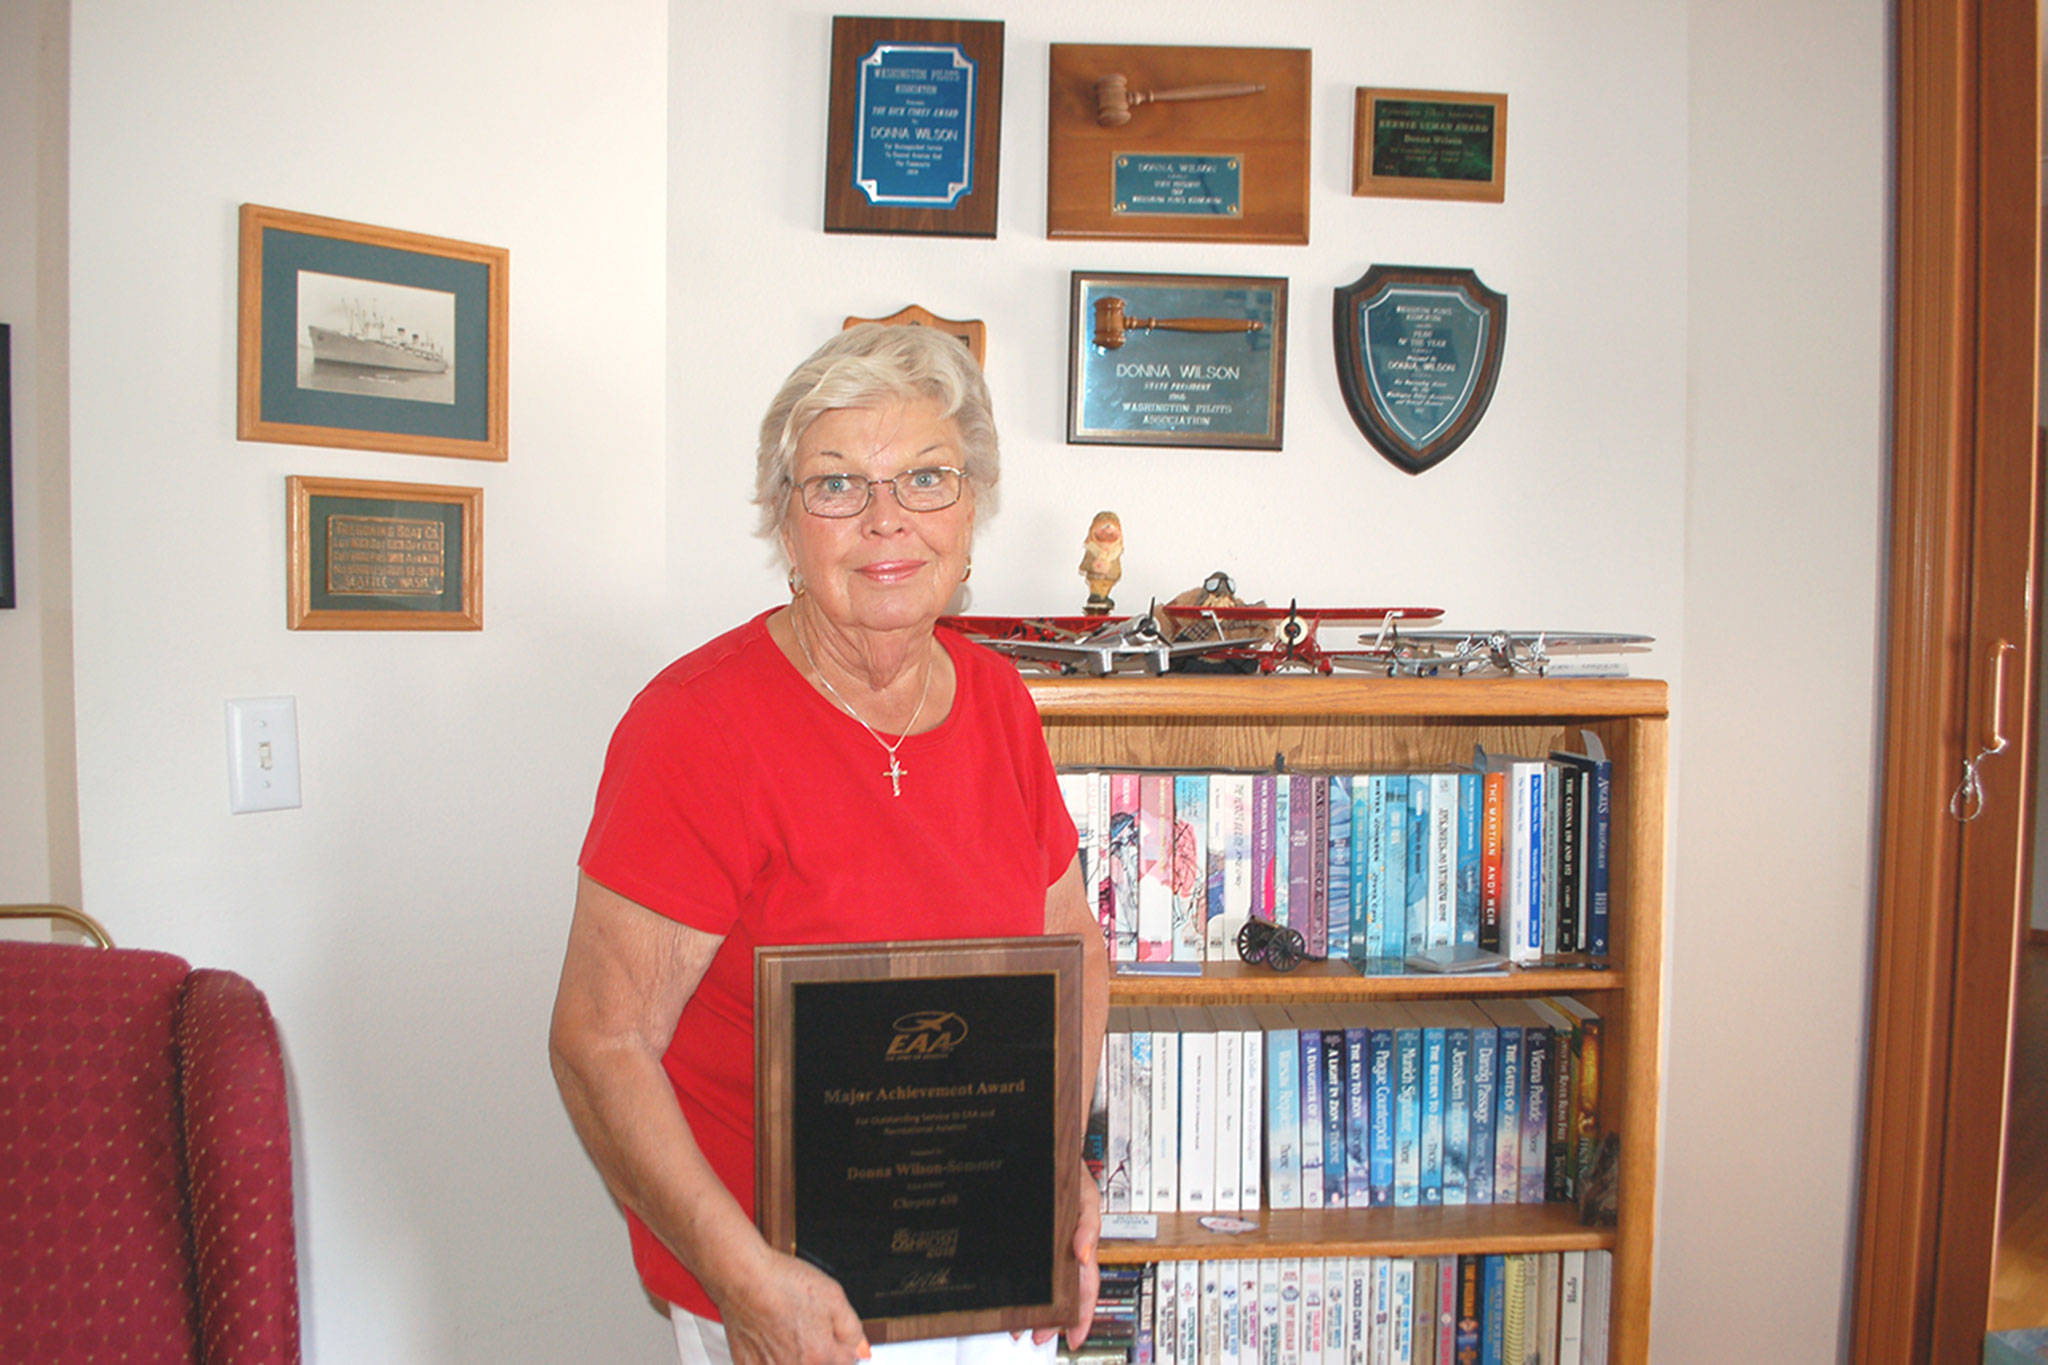 Among a handful of other aviation awards that hang on the walls of her home, Sequim’s Donna Wilson-Sommer is the Experimental Aircraft Association 2018 Major Achievement Award Winner for her many years of promoting aviation in her local communities. Sequim Gazette photo by Erin Hawkins